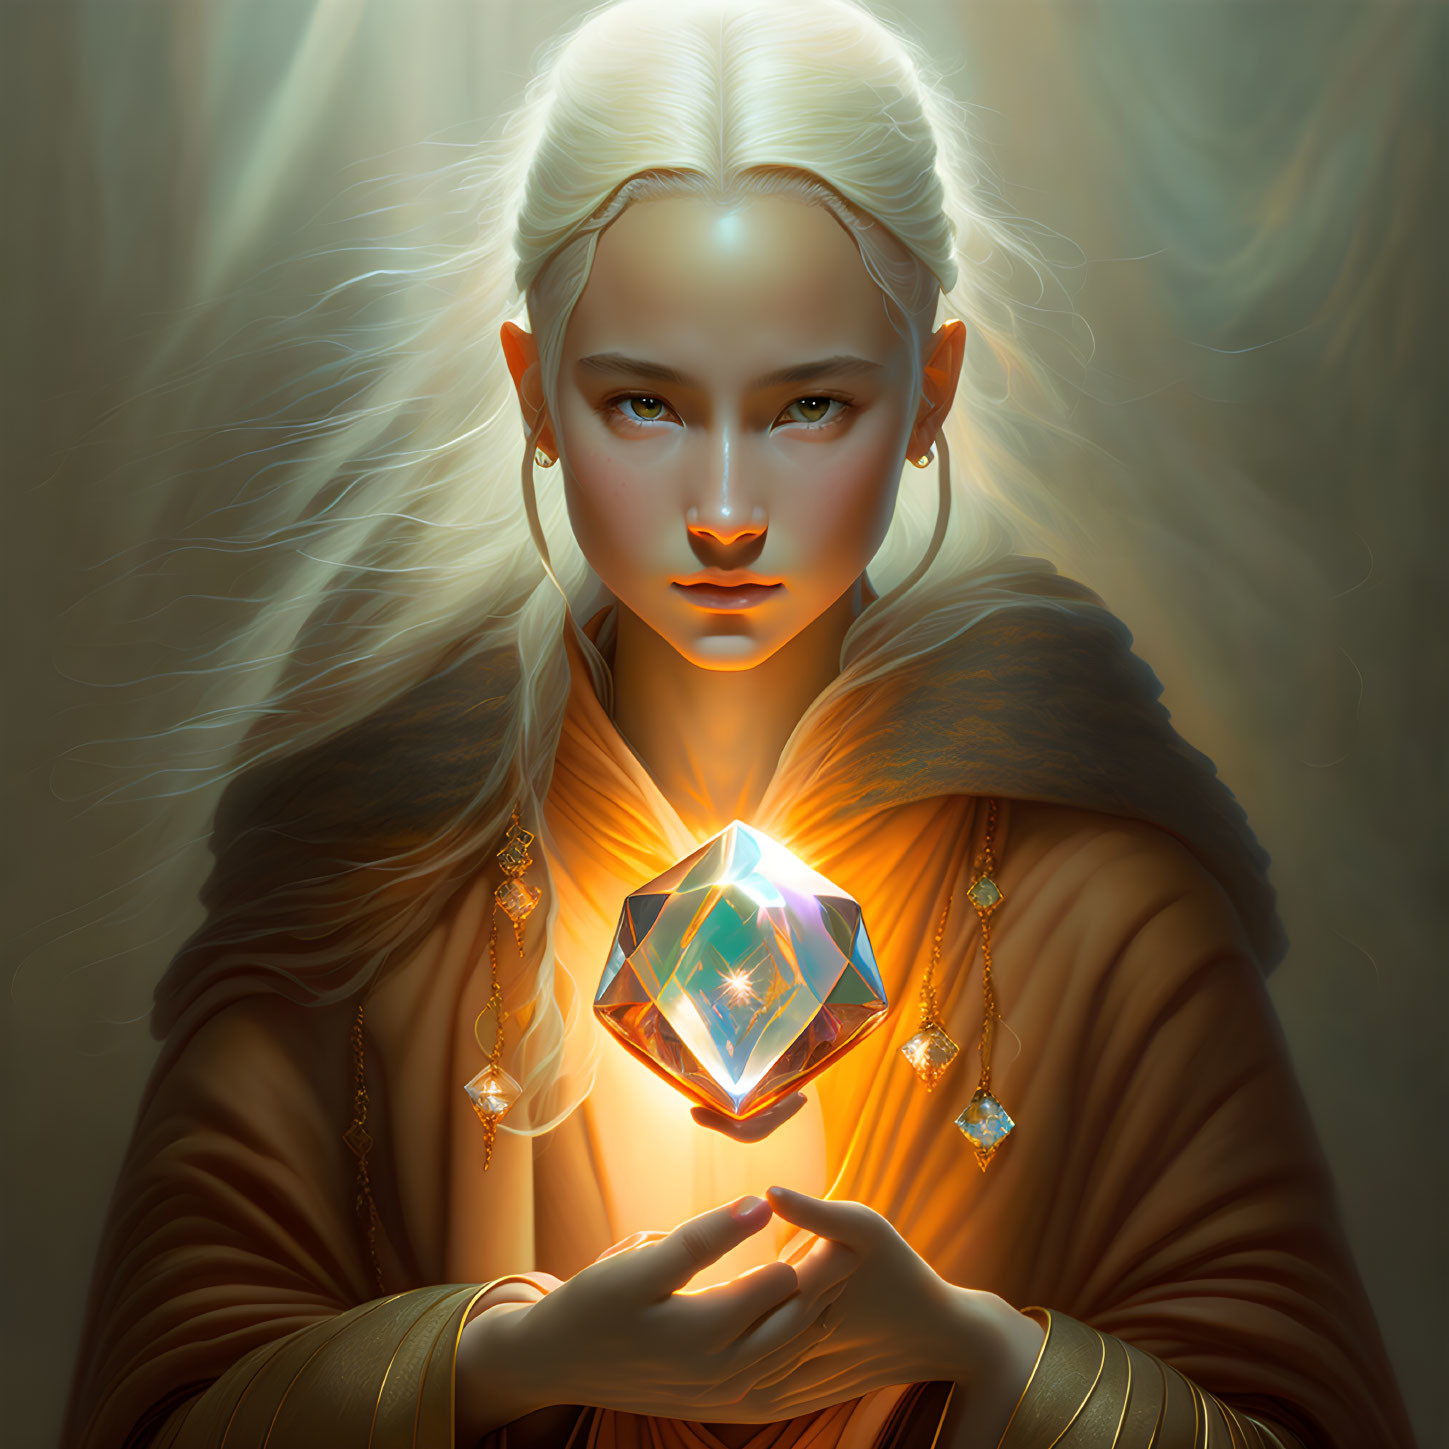 teen monk with a magic power crystal